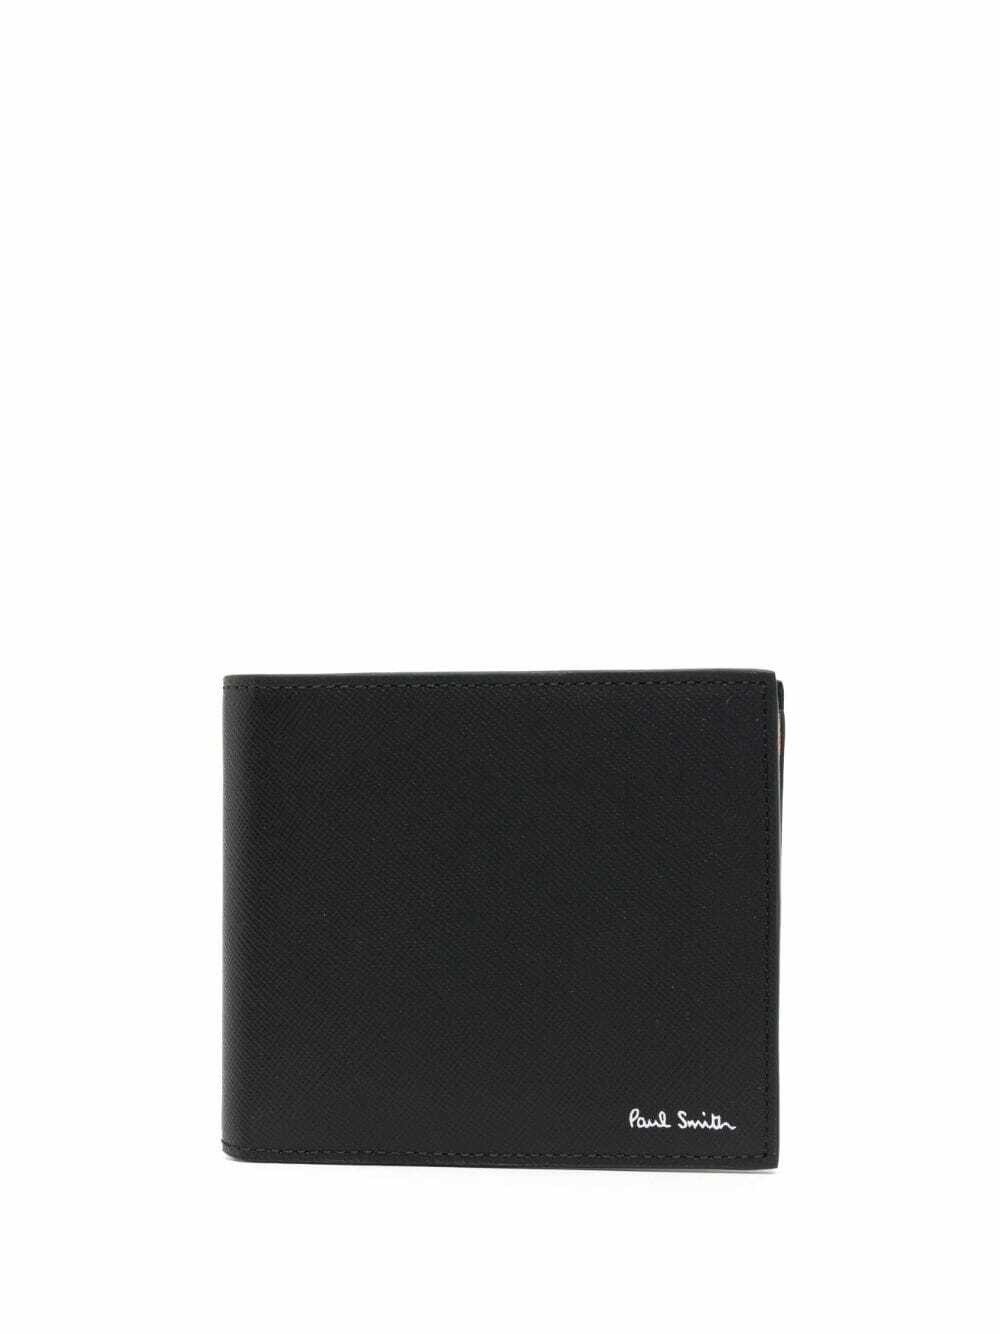 PAUL SMITH - Leather Wallet Paul Smith